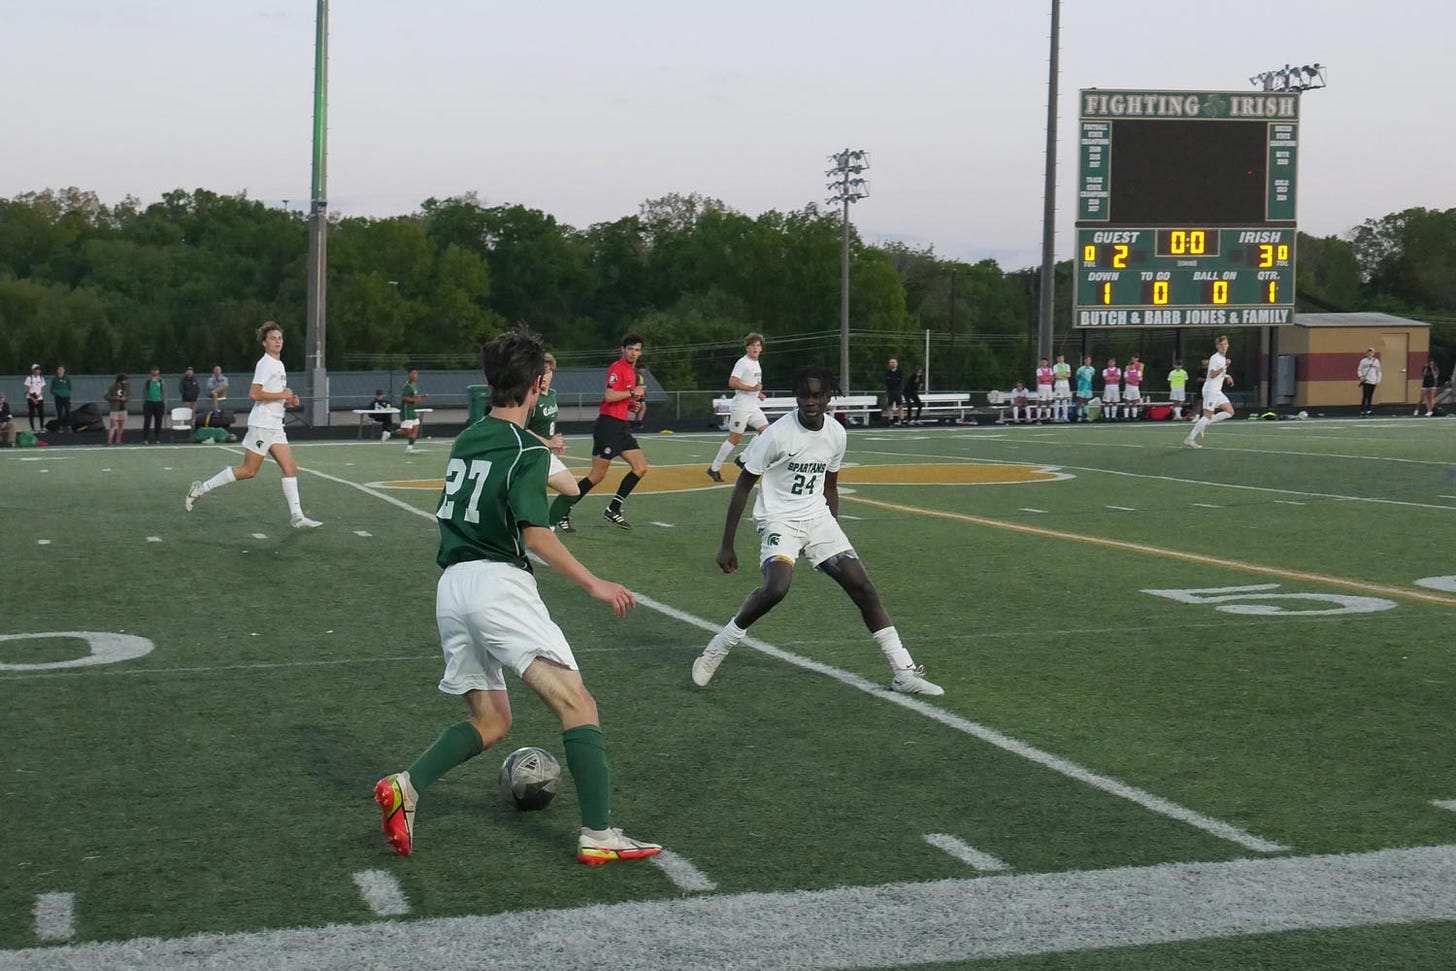 Knoxville Catholic and Webb boys soccer players compete on the field.